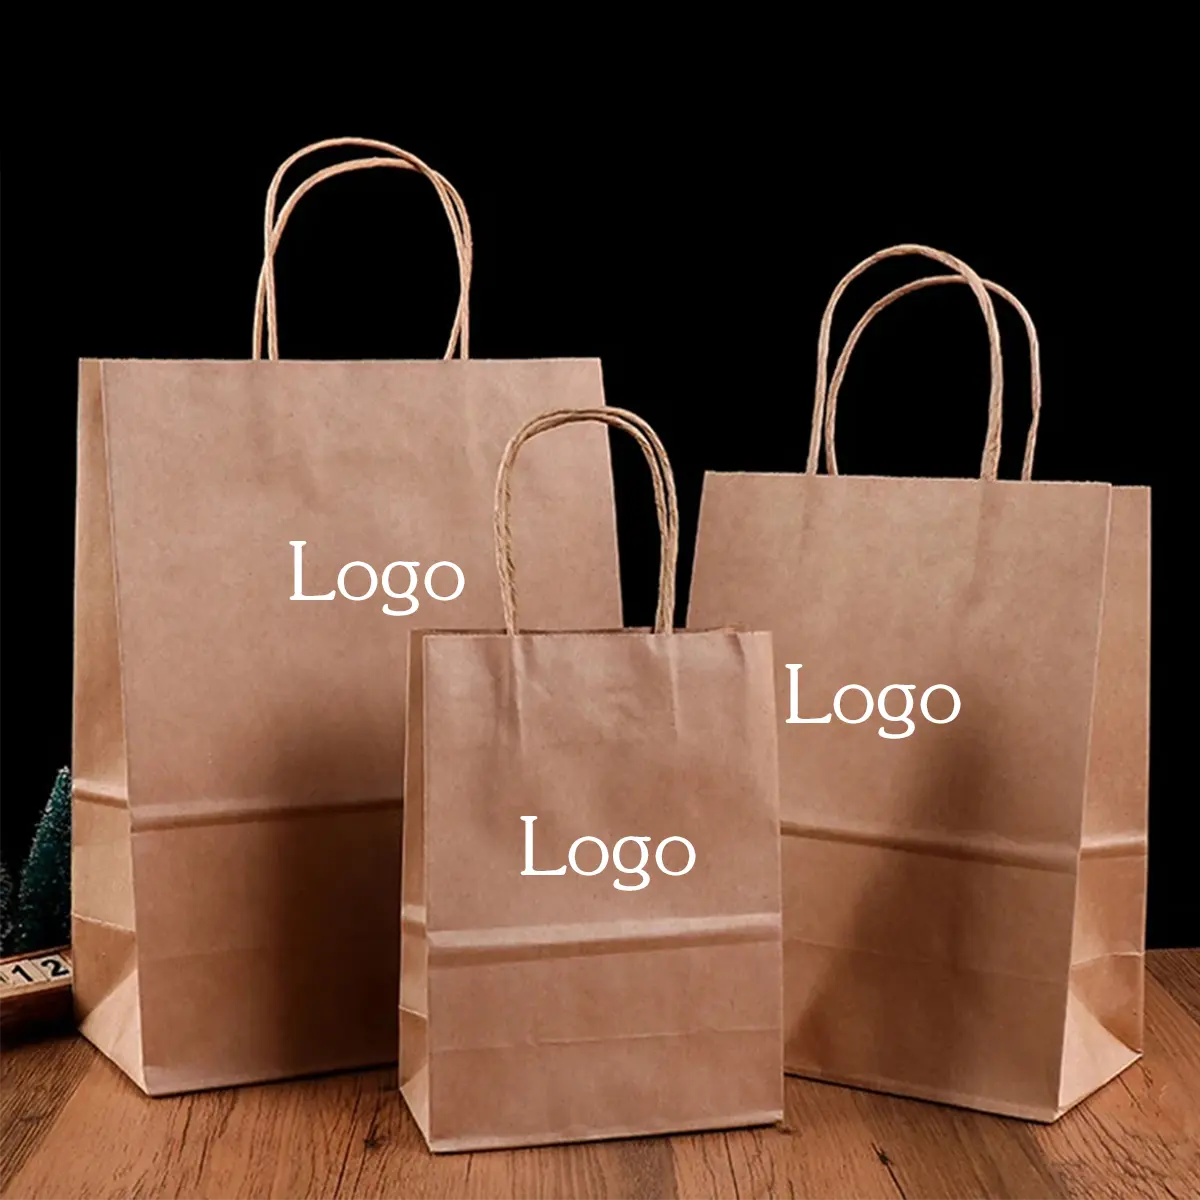 Wholesale Recycled Materials Craft Bolsa De Papel Disposable Brown White Kraft Paper Bags For Food Cake Wine Packaging